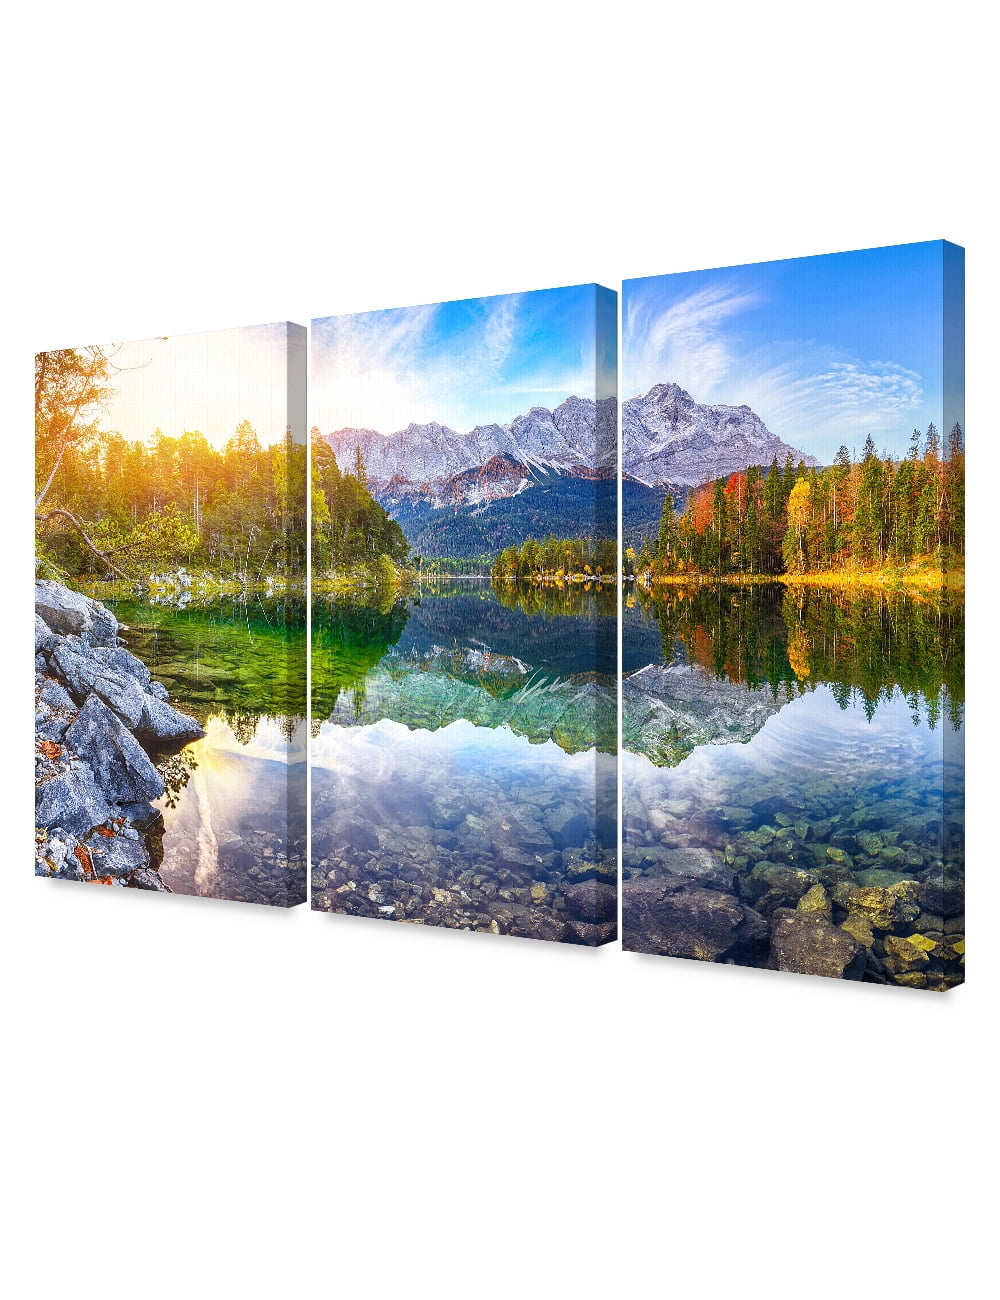 DecorArts Eibsee Lake(Triptych). Giclee Canvas Prints for Wall Decor.48x32